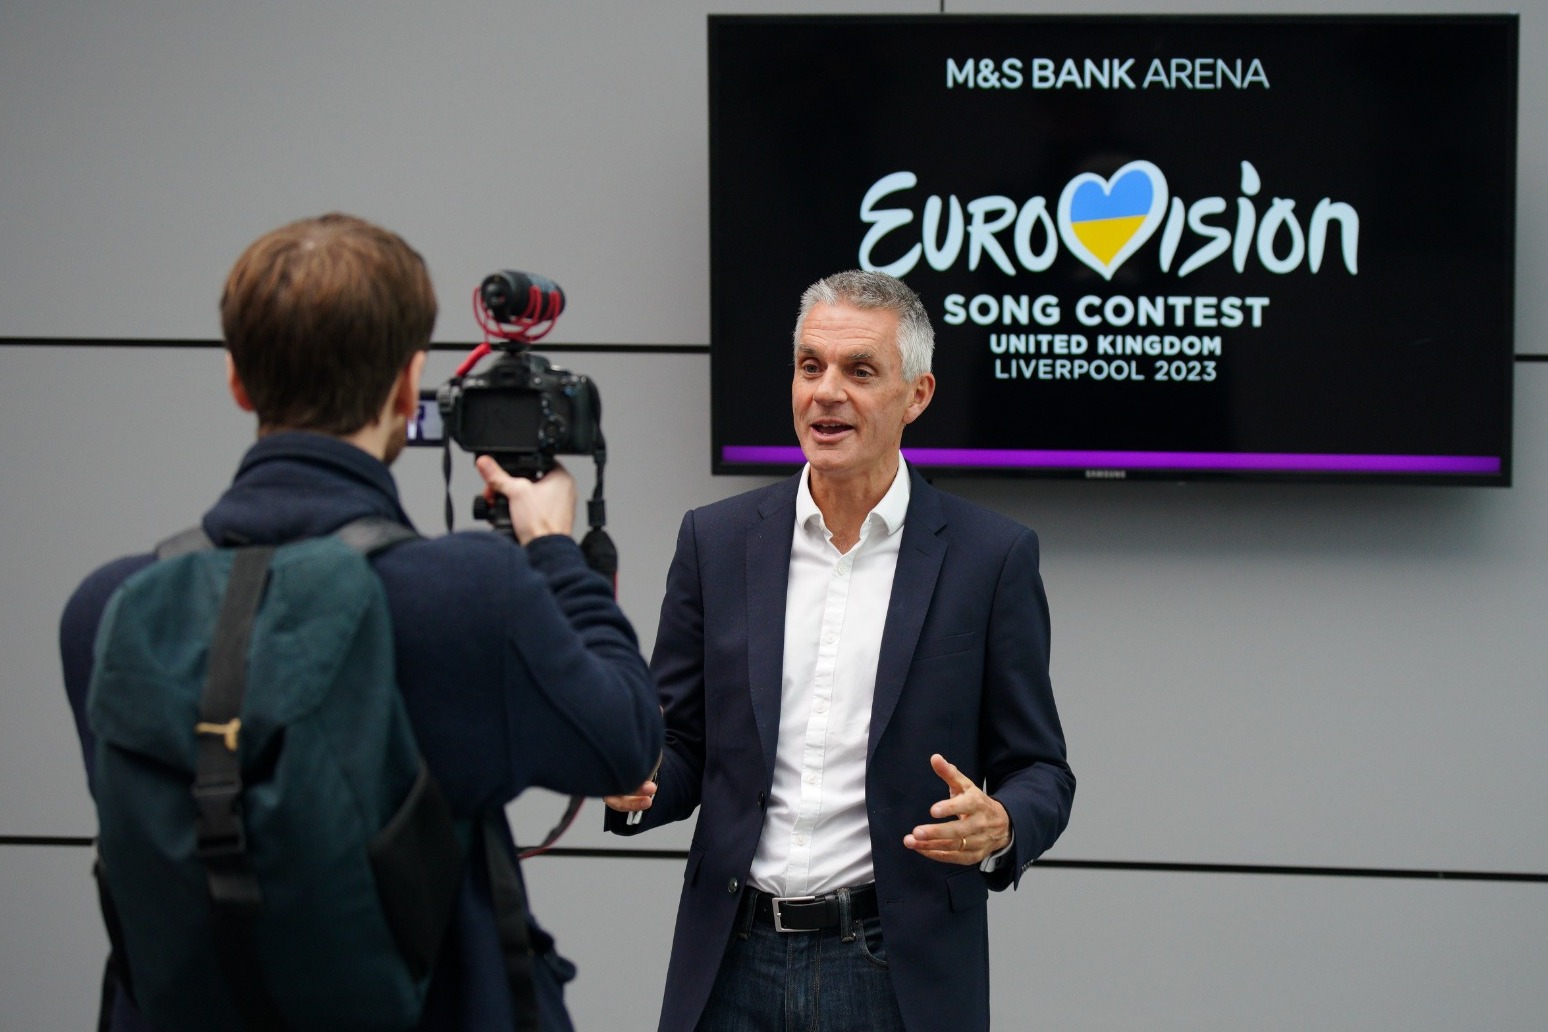 Eurovision chief: Russian exclusion from song contest ‘was and still is’ hard 